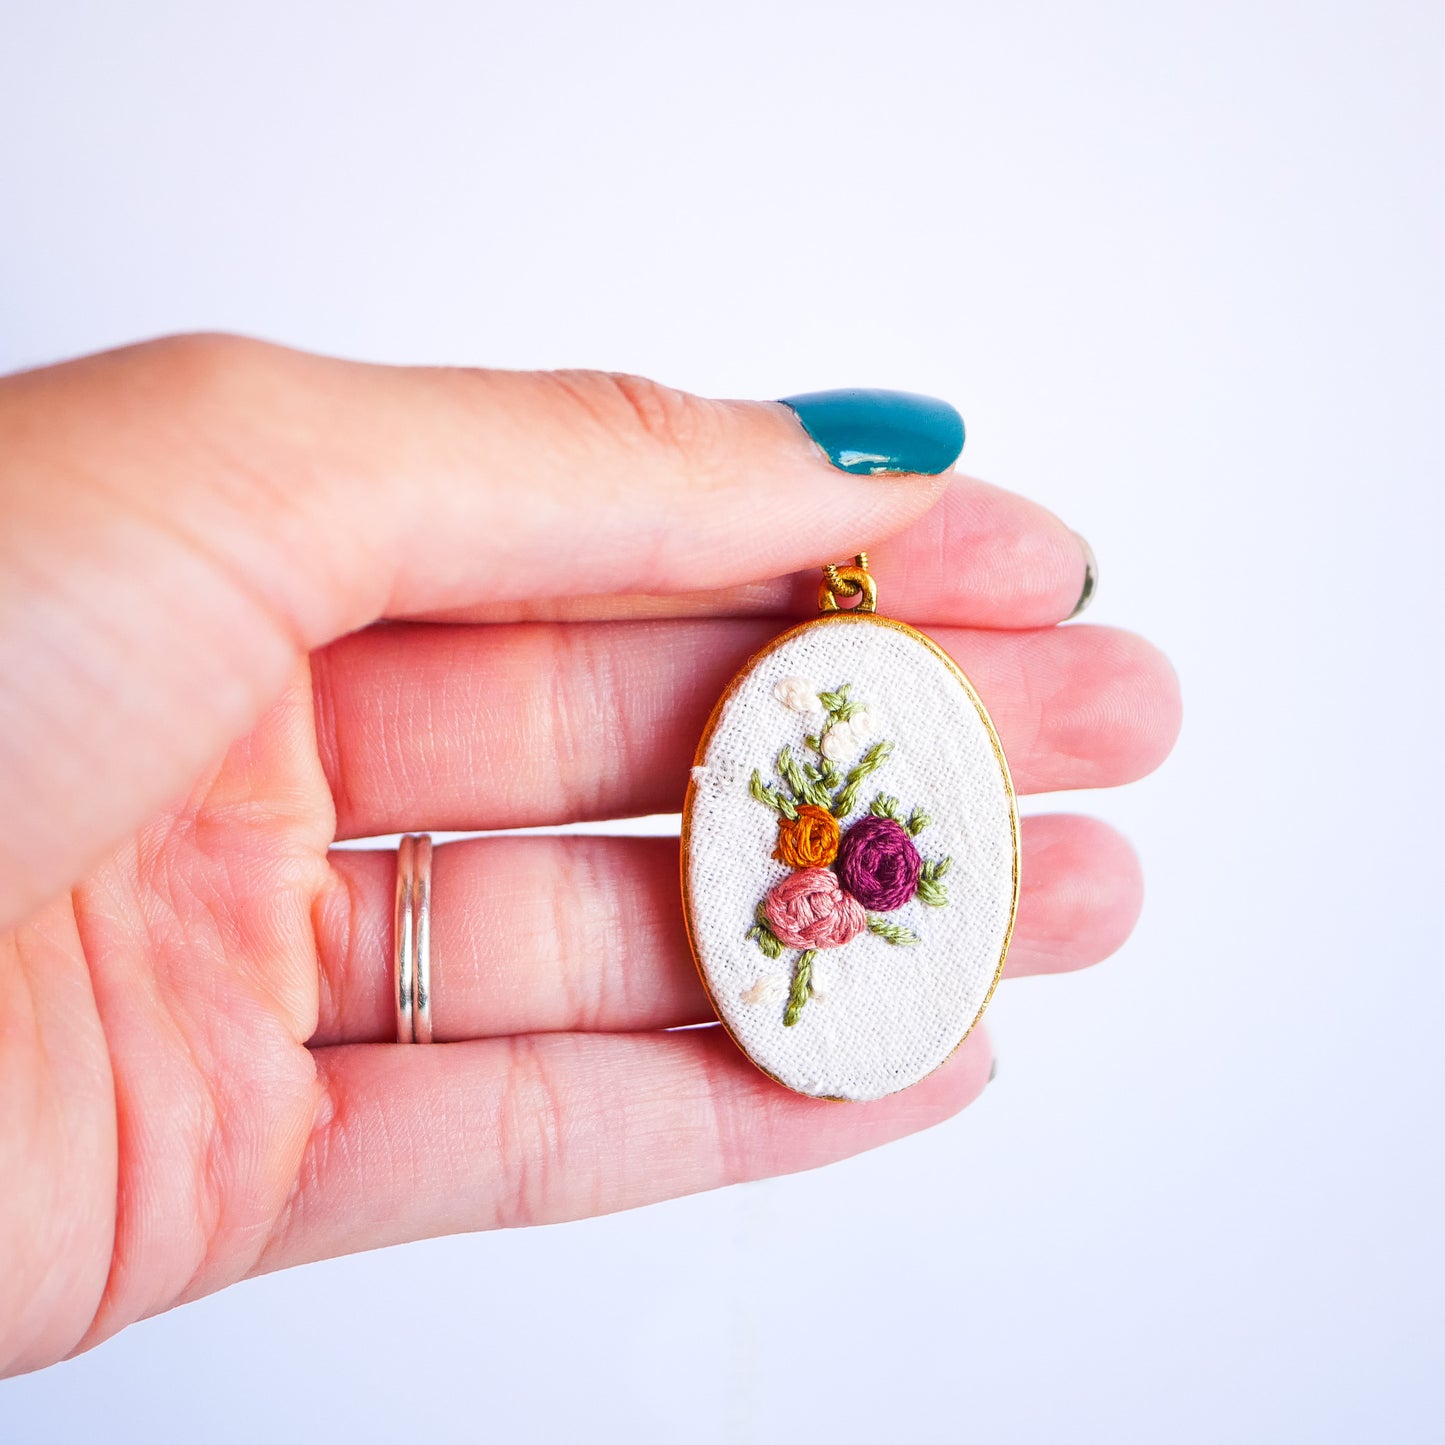 Embroidered Necklace Class - Tuesday April 16th 6-8pm